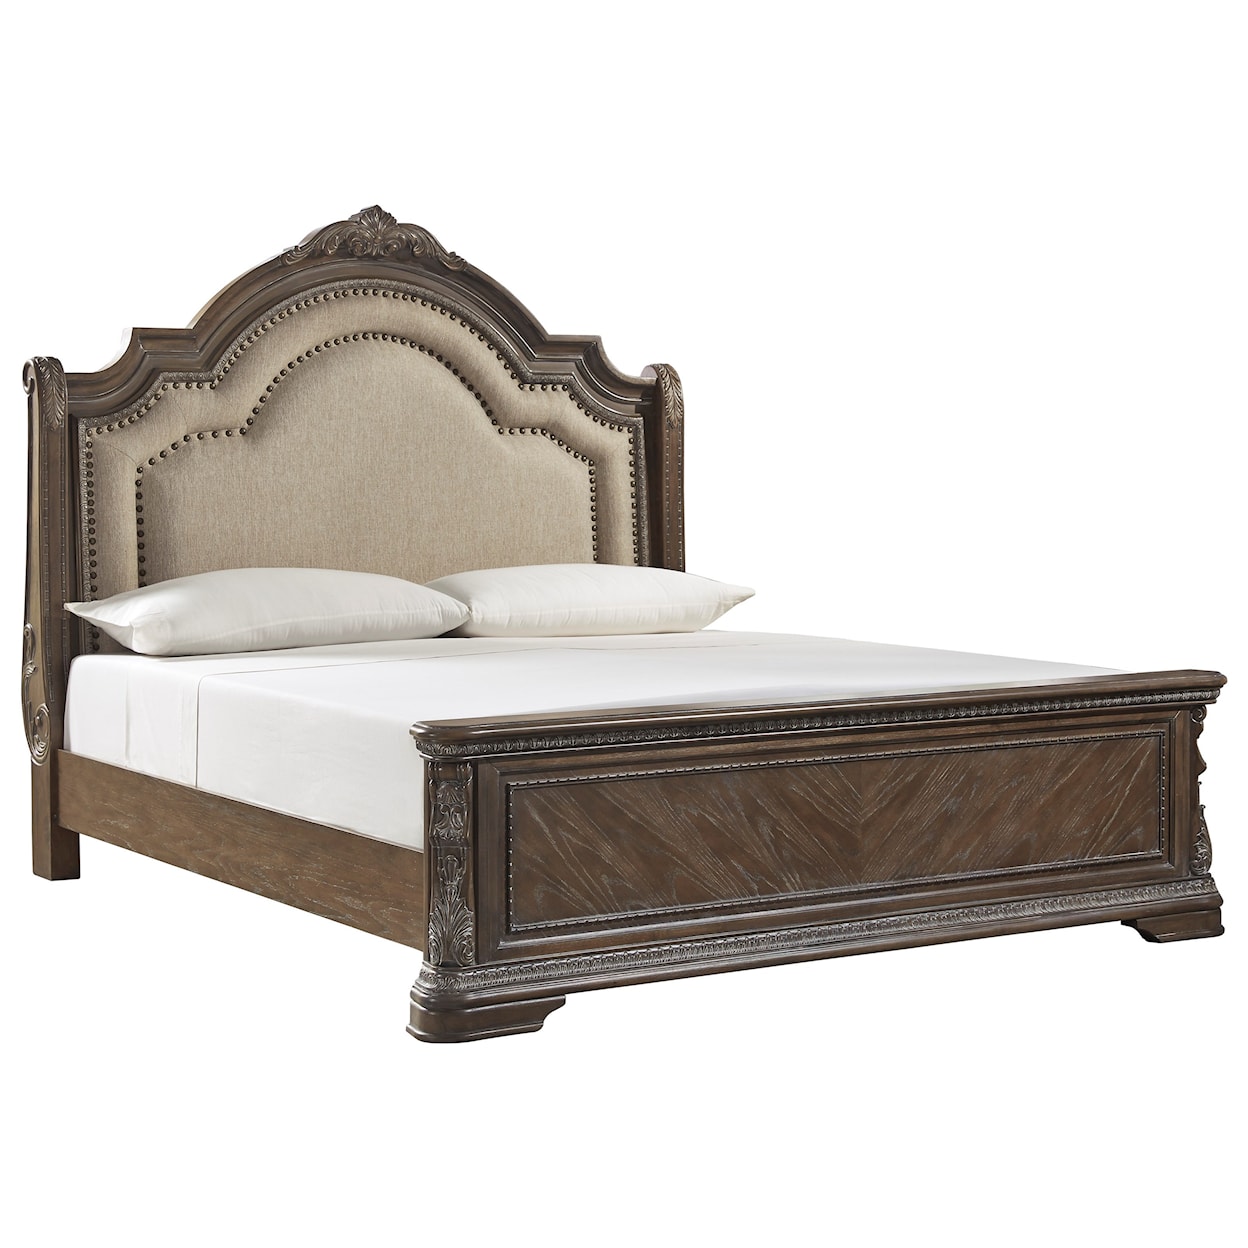 Signature Design by Ashley Charmond King Upholstered Bed